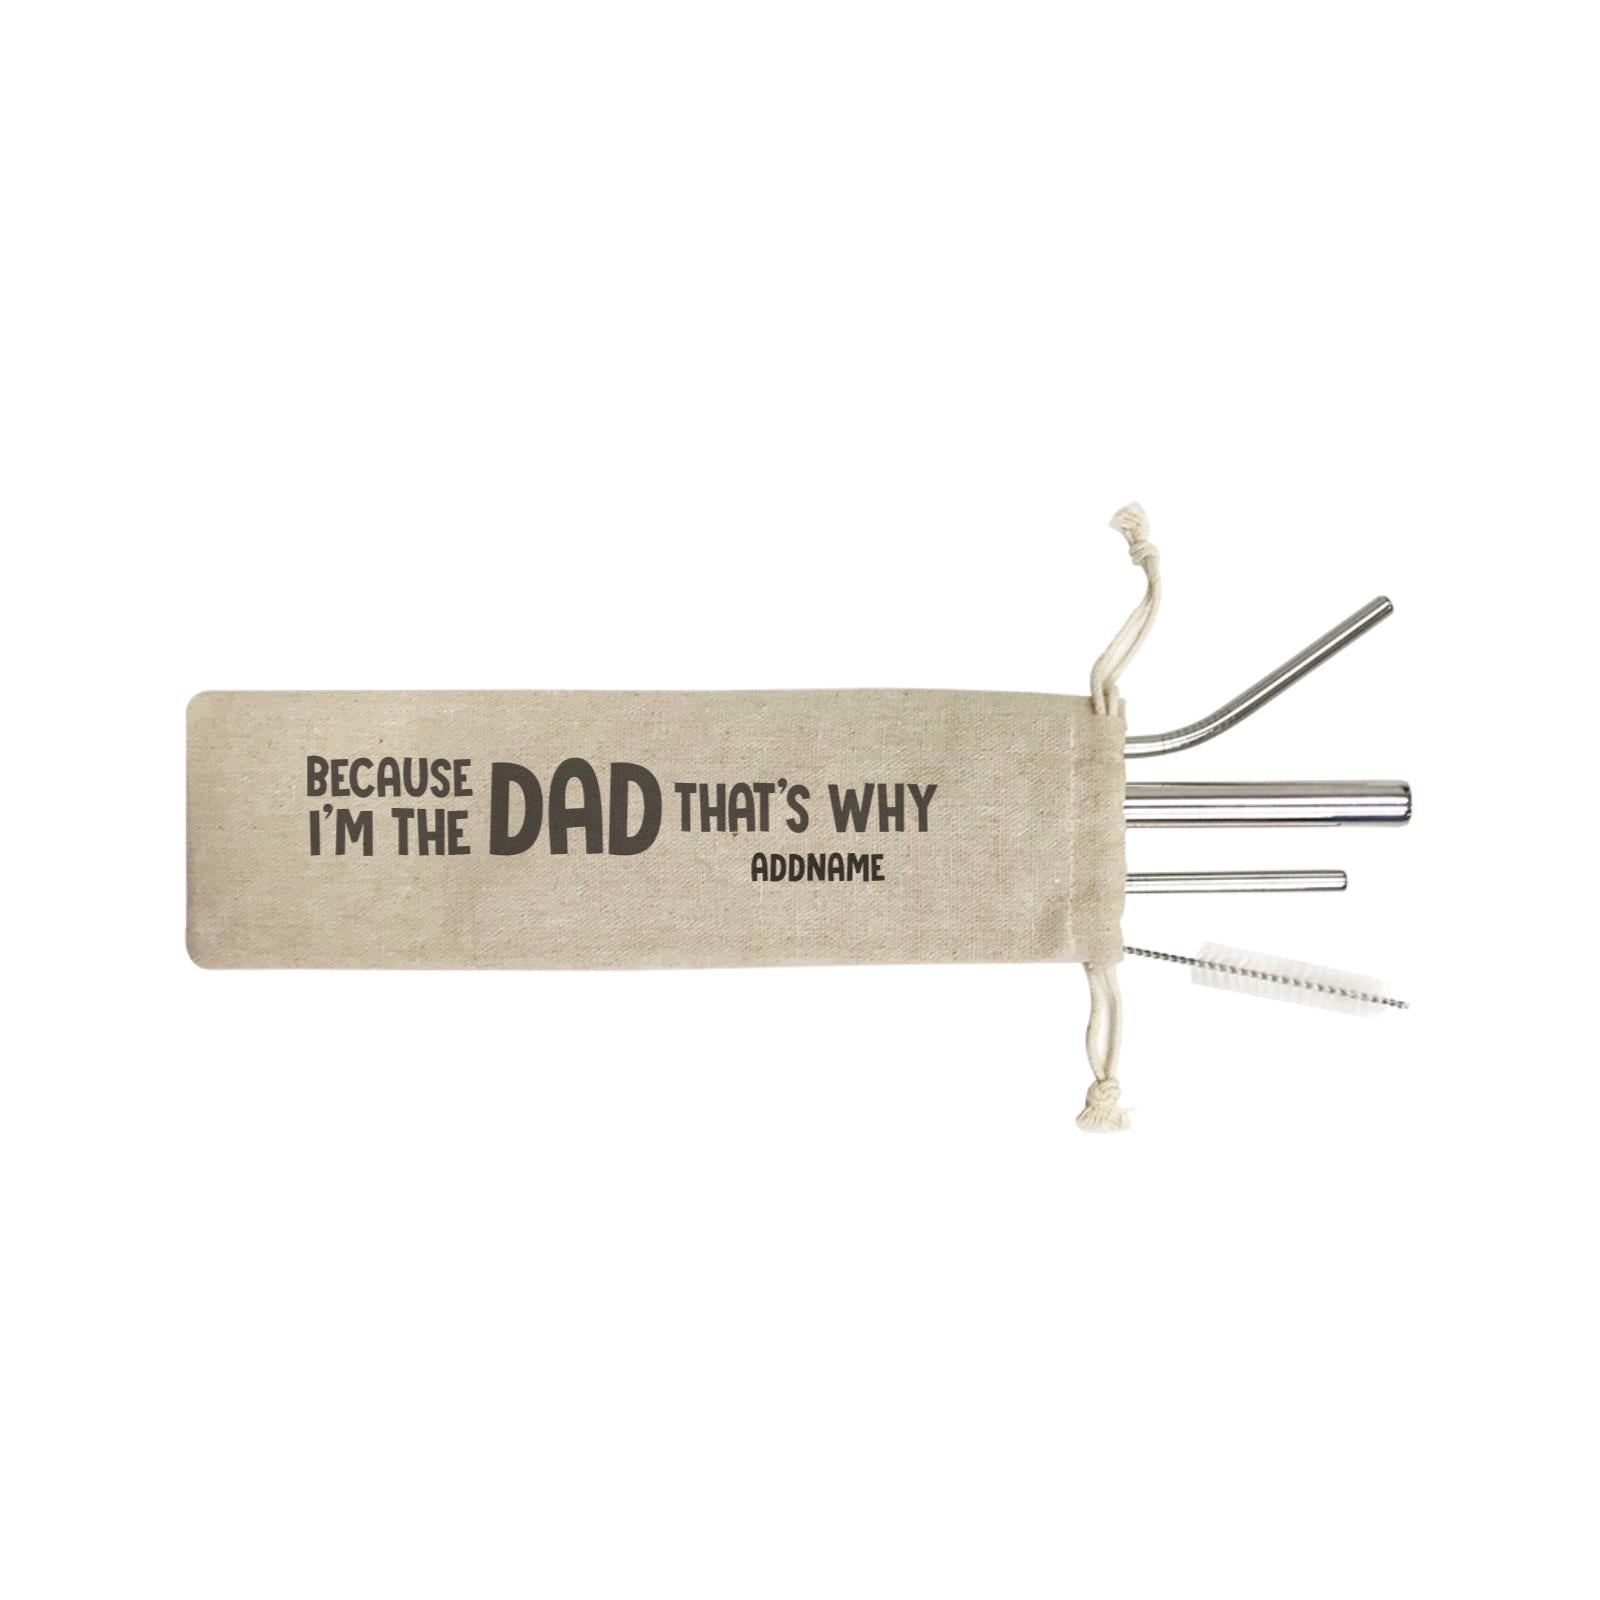 Because Im The Dad Thats Why Addname SB 4-In-1 Stainless Steel Straw Set in Satchel